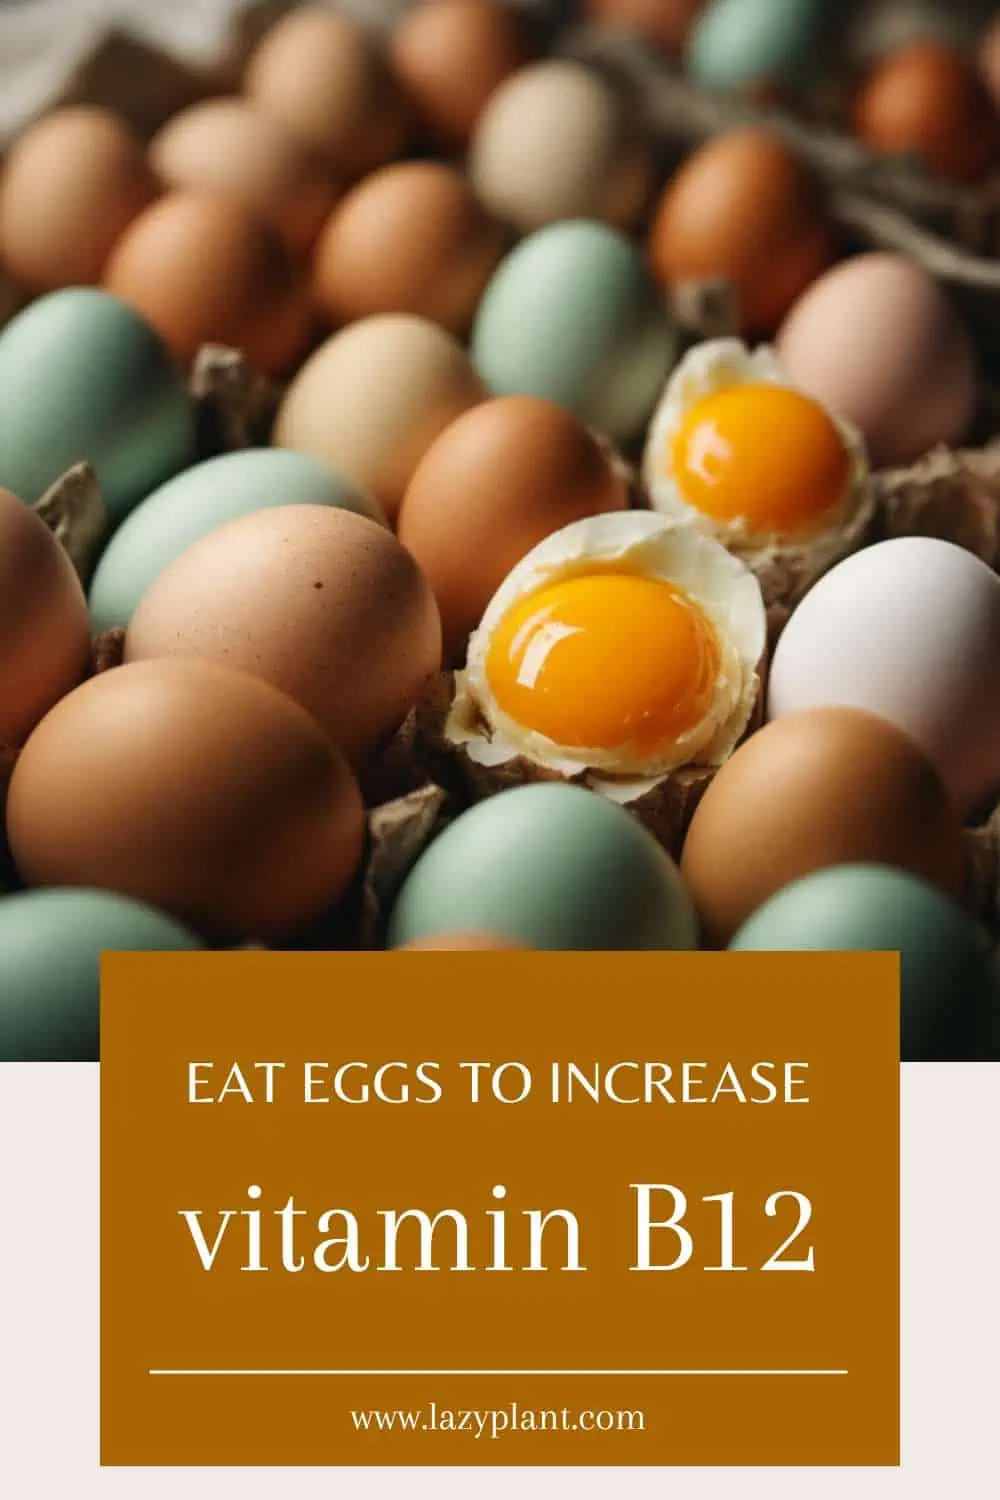 Can an egg a day help me meet my needs for vitamin B12?